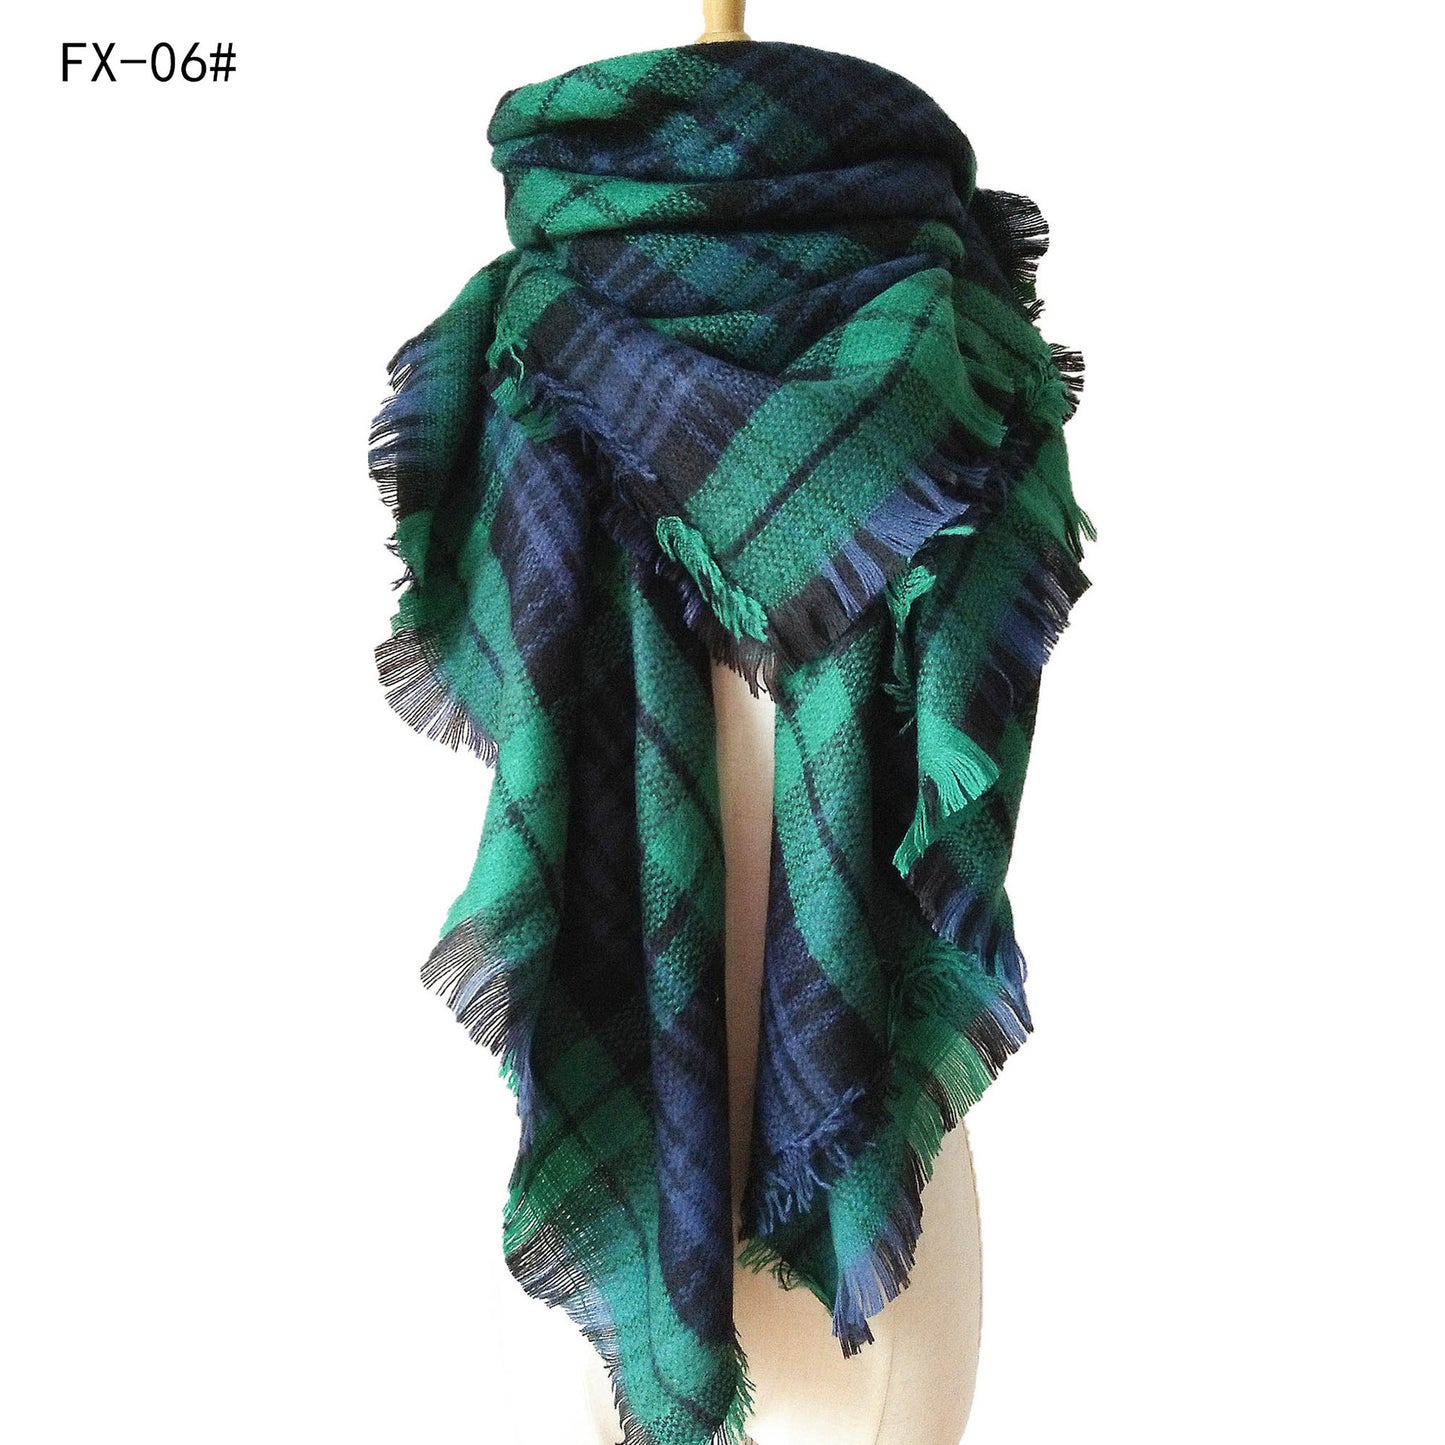 Colorful Soft Winter Scarfs for Women